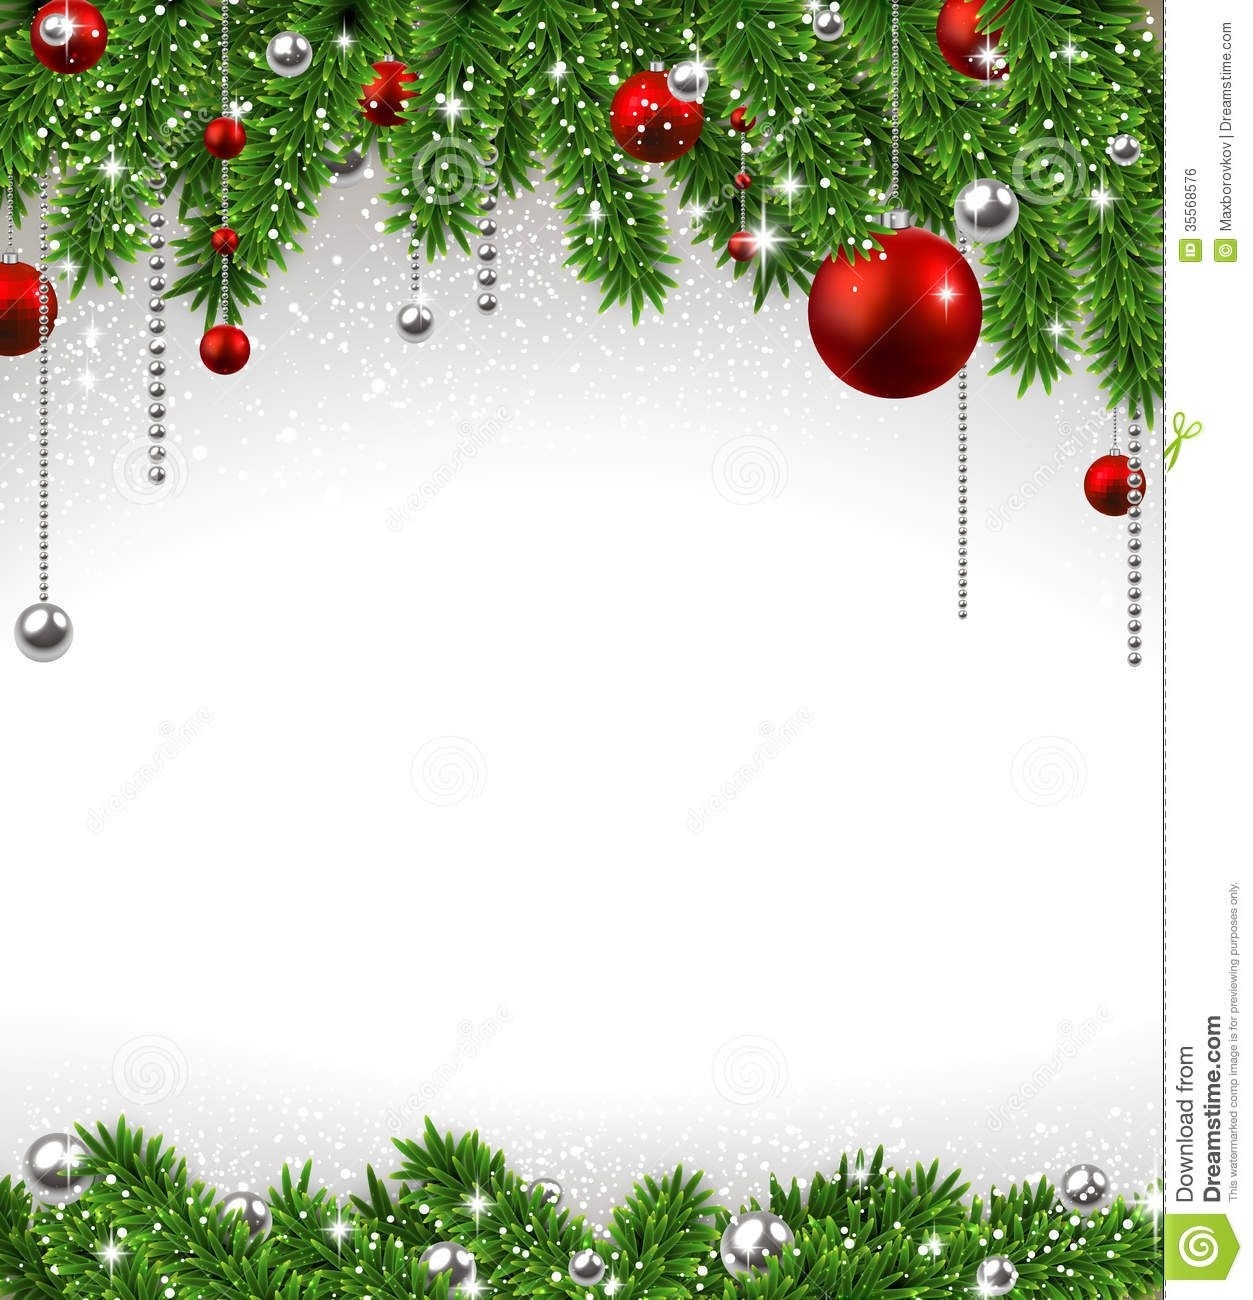 christmas background with fir branches and balls. royalty free